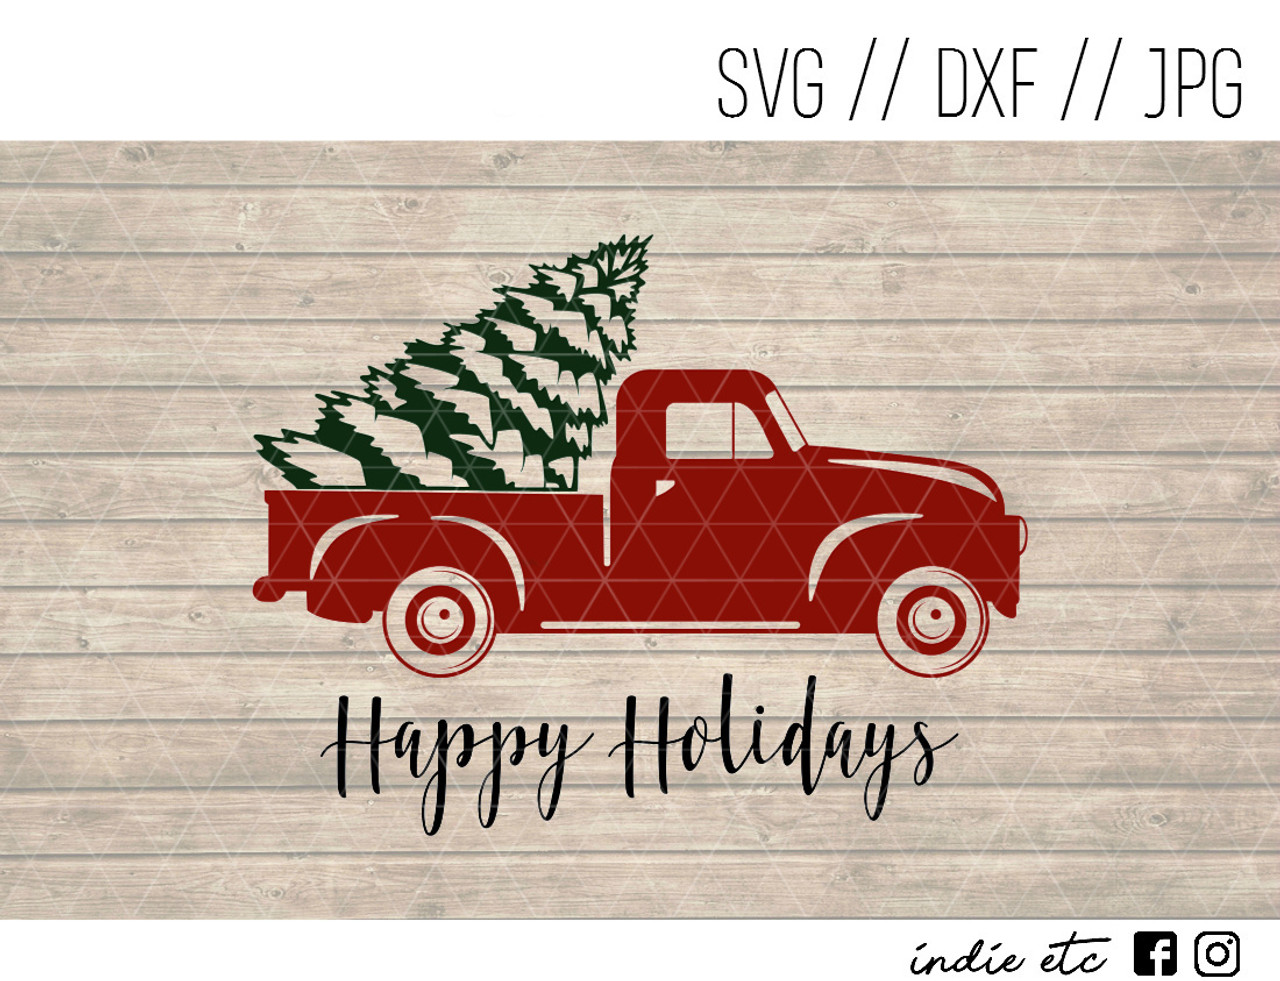 Happy Holidays Digital Art File Red Truck And Tree